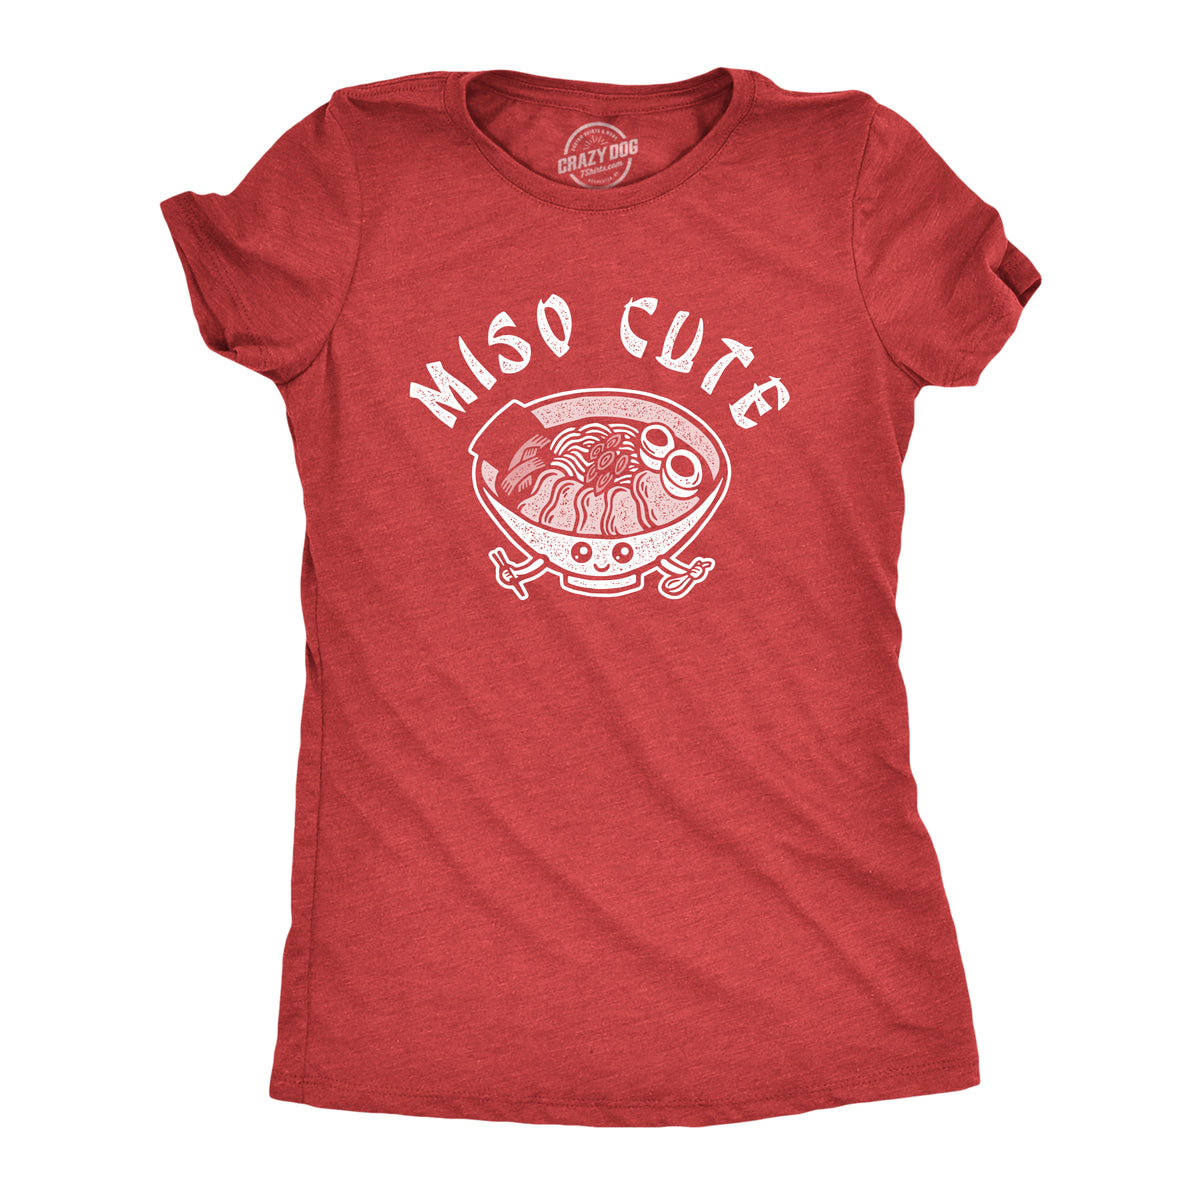 Funny Heather Red Miso Cute Womens T Shirt Nerdy Food Sarcastic Tee